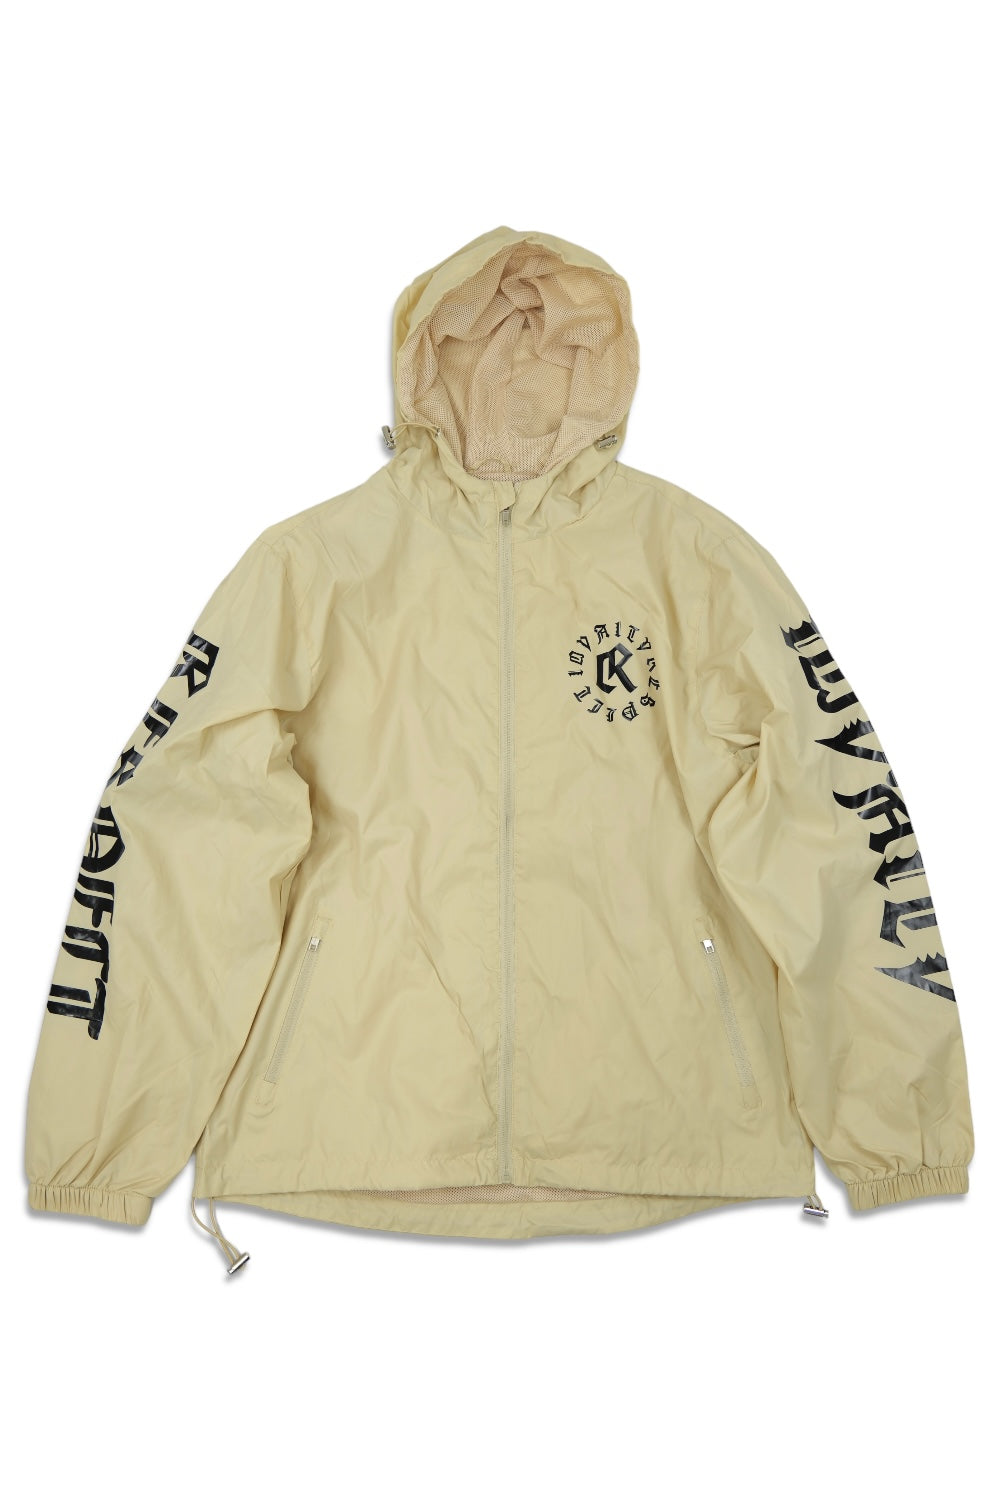 Loyalty and Respect Windbreaker